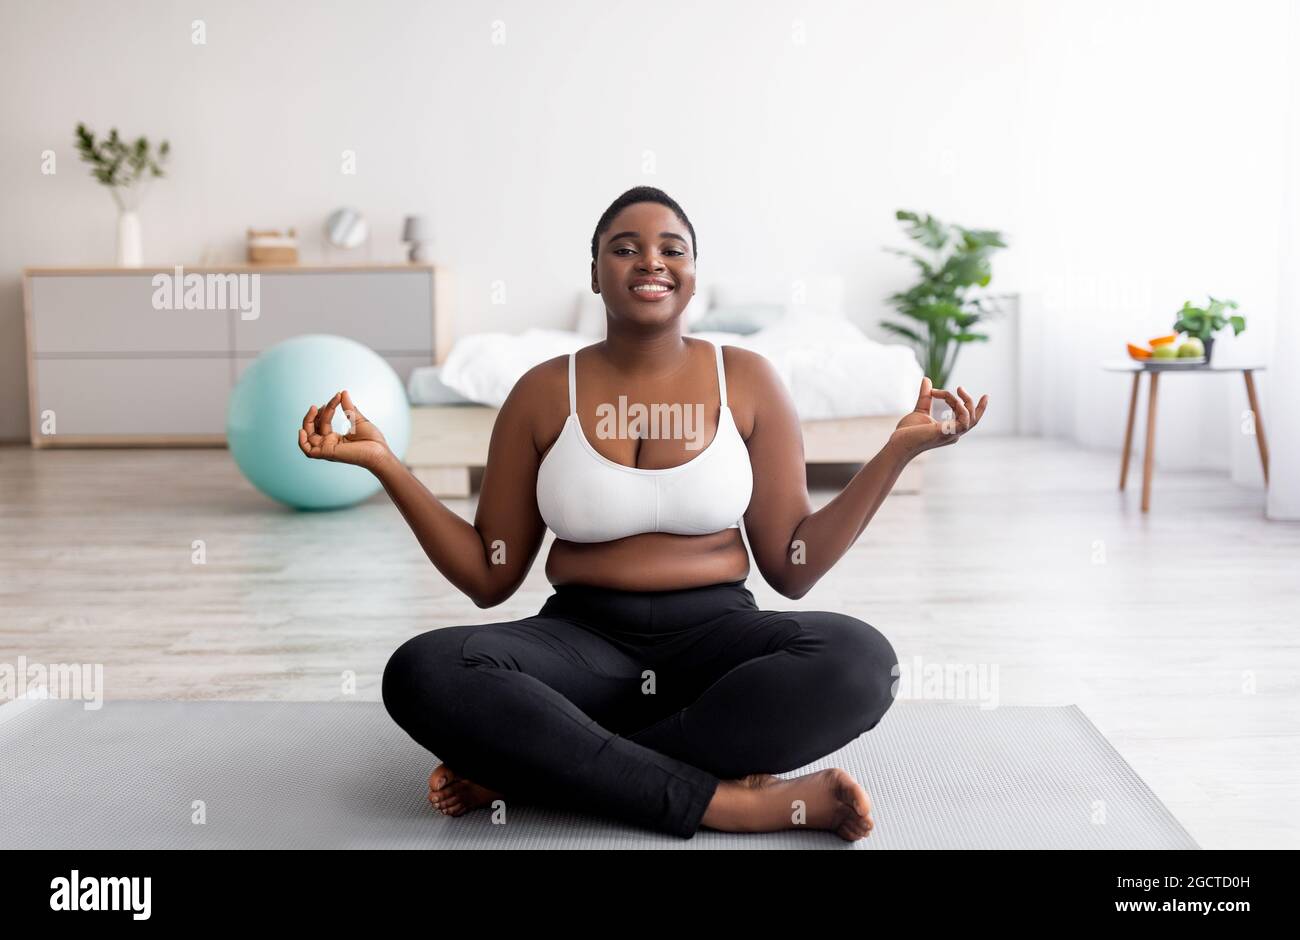 Overweight black woman sitting on sports mat in lotus pose, meditating, doing yoga practice at home Stock Photo